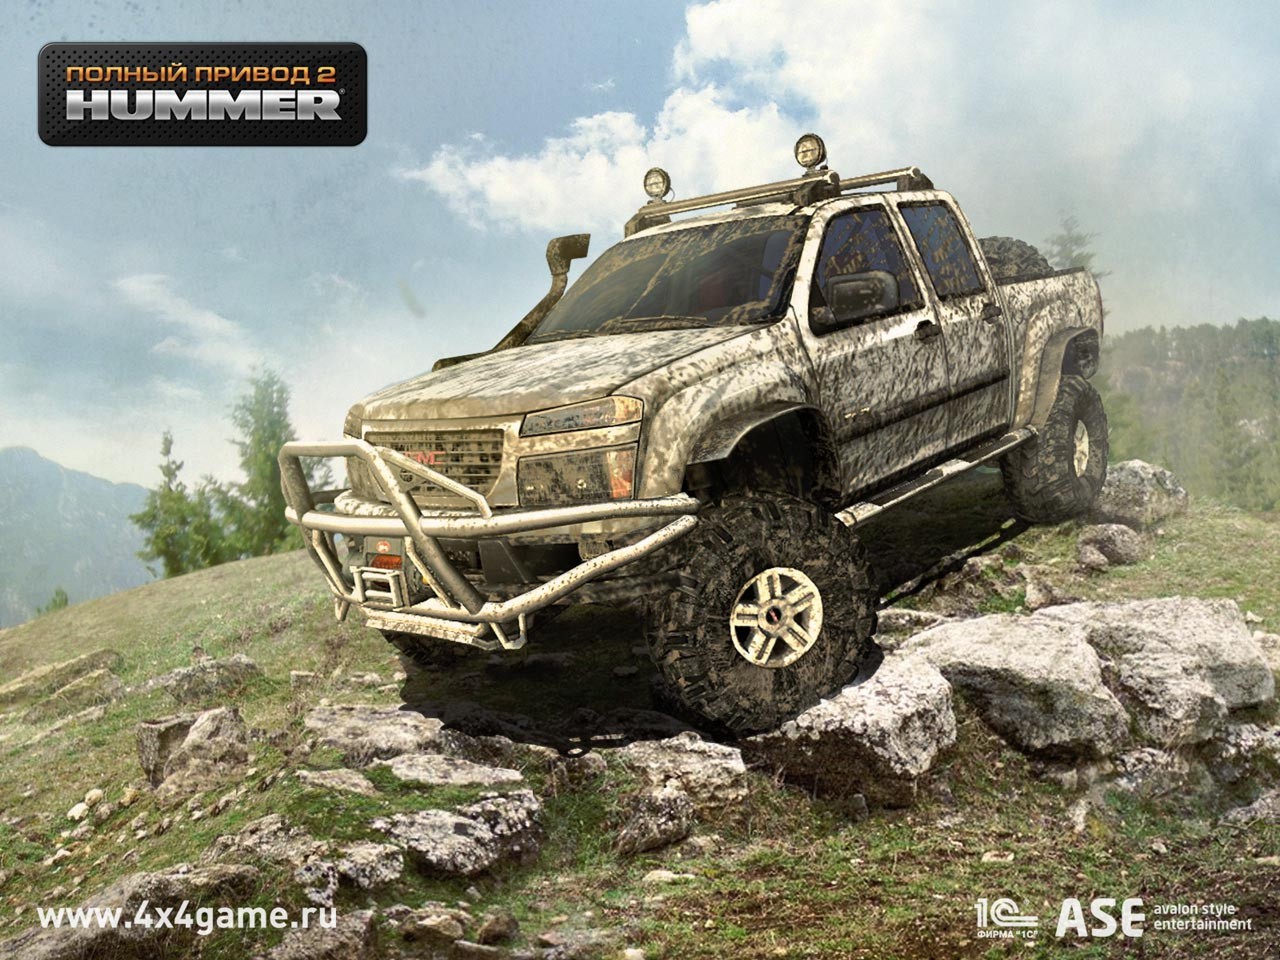 Download High quality 4x4 Off Road 2 Hummer wallpaper / Games / 1280x960